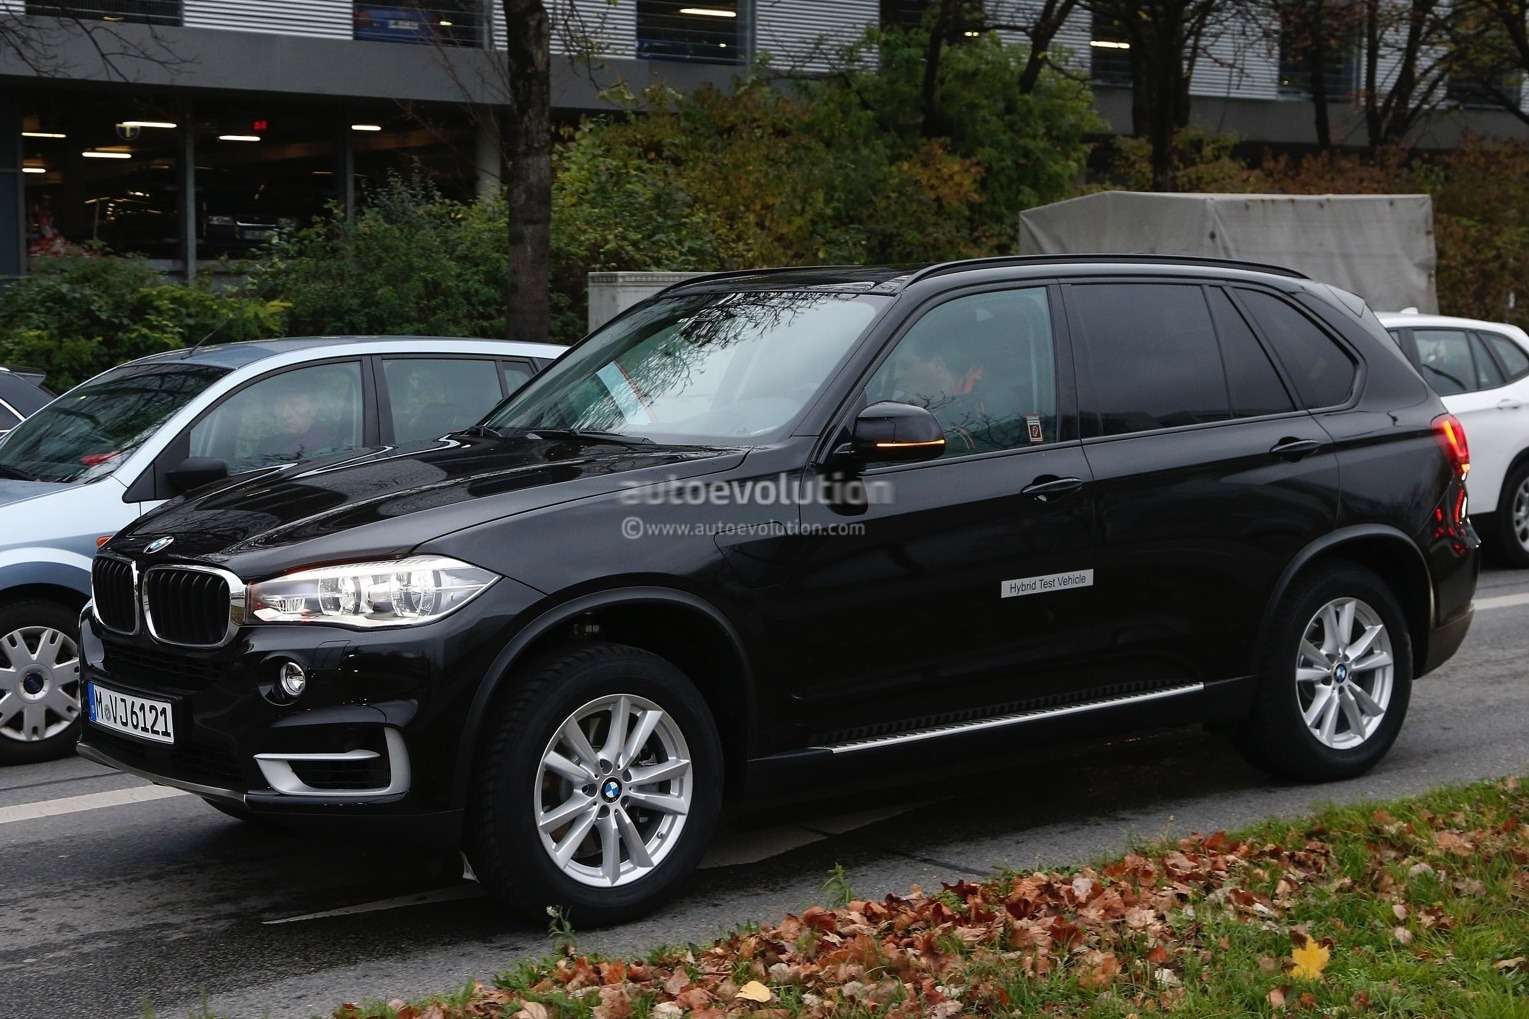 spyshots-hybrid-bmw-x5-goes-out-for-tests-in-traffic-1080p-3_no_copyright